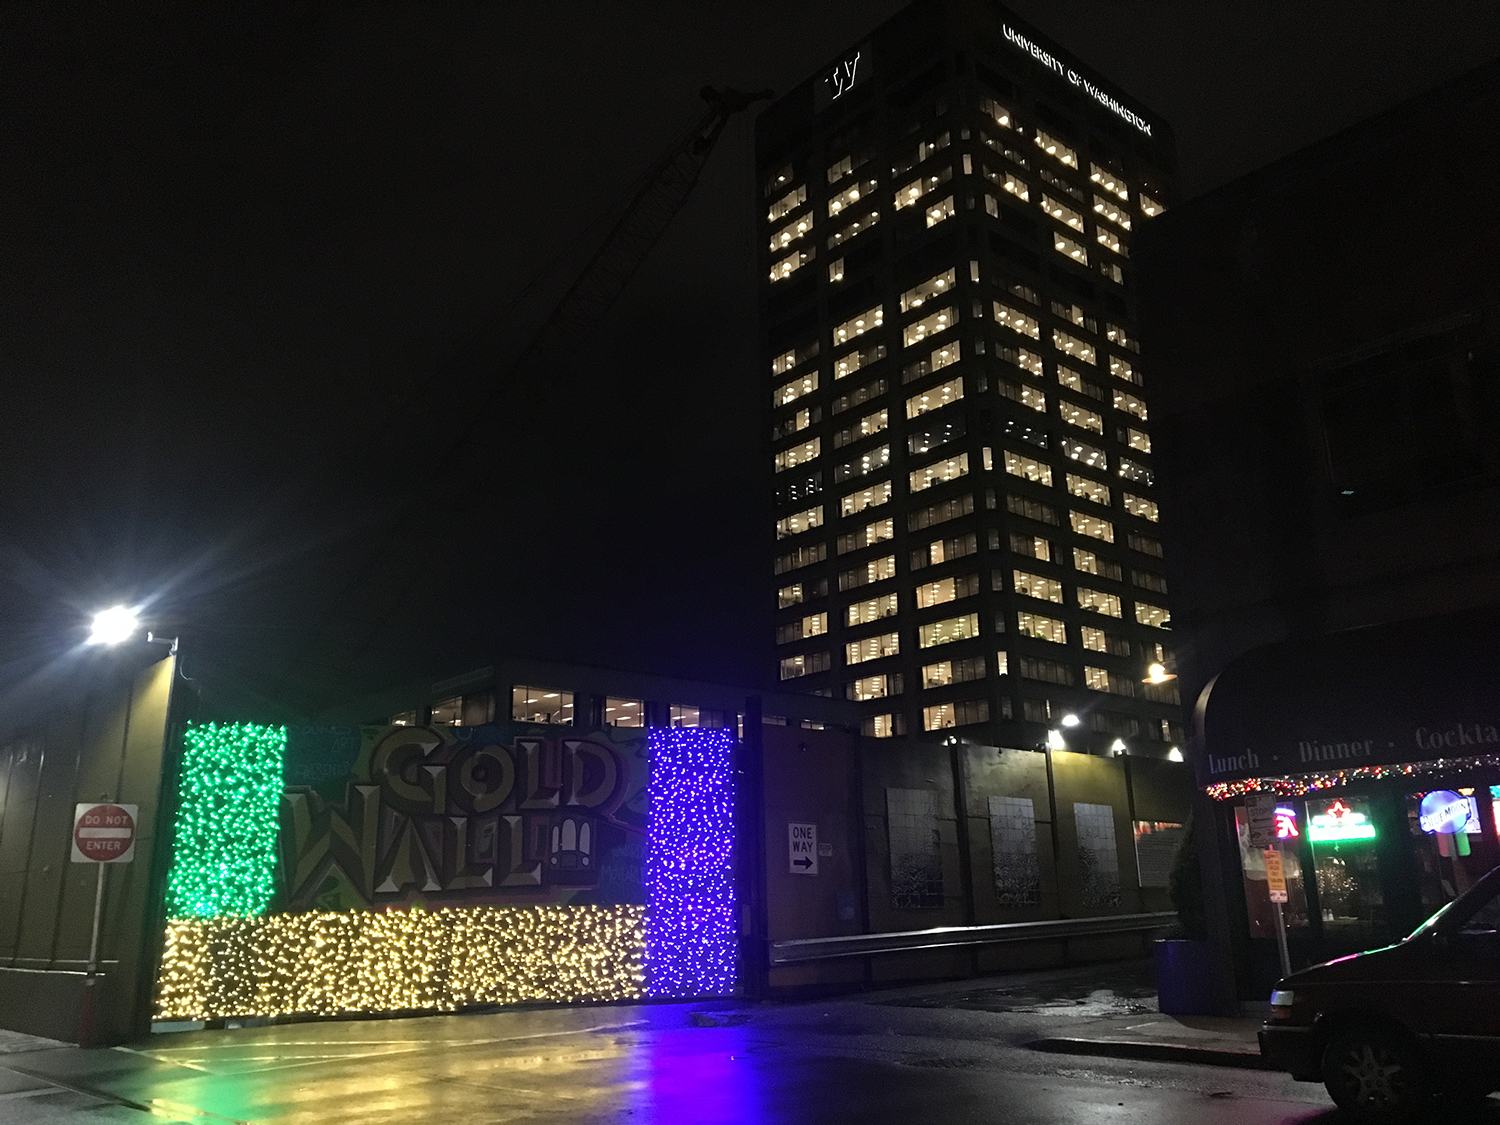 Festive lighting surrounds artist Emily Gussin’s Gold Wall sign at NE 43rd St. at the alley between "The Ave" and Brooklyn Ave NE.